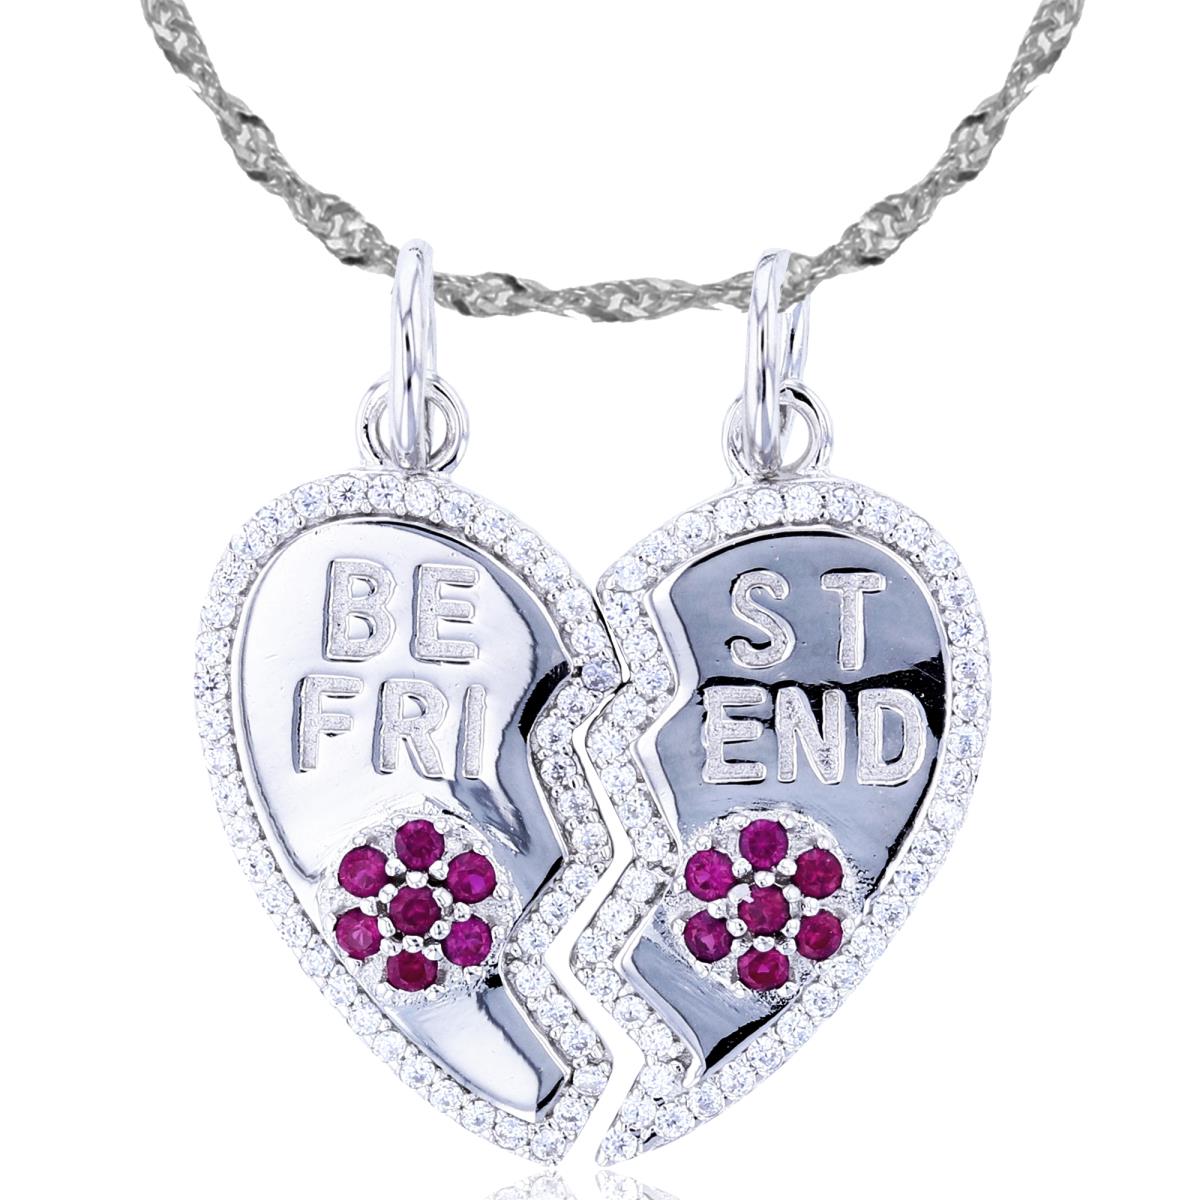 Sterling Silver Rhodium Rnd White & #8 Ruby CZ "Be Friend" Devided Heart 18"+2" Singapore Necklace (2 Chains)